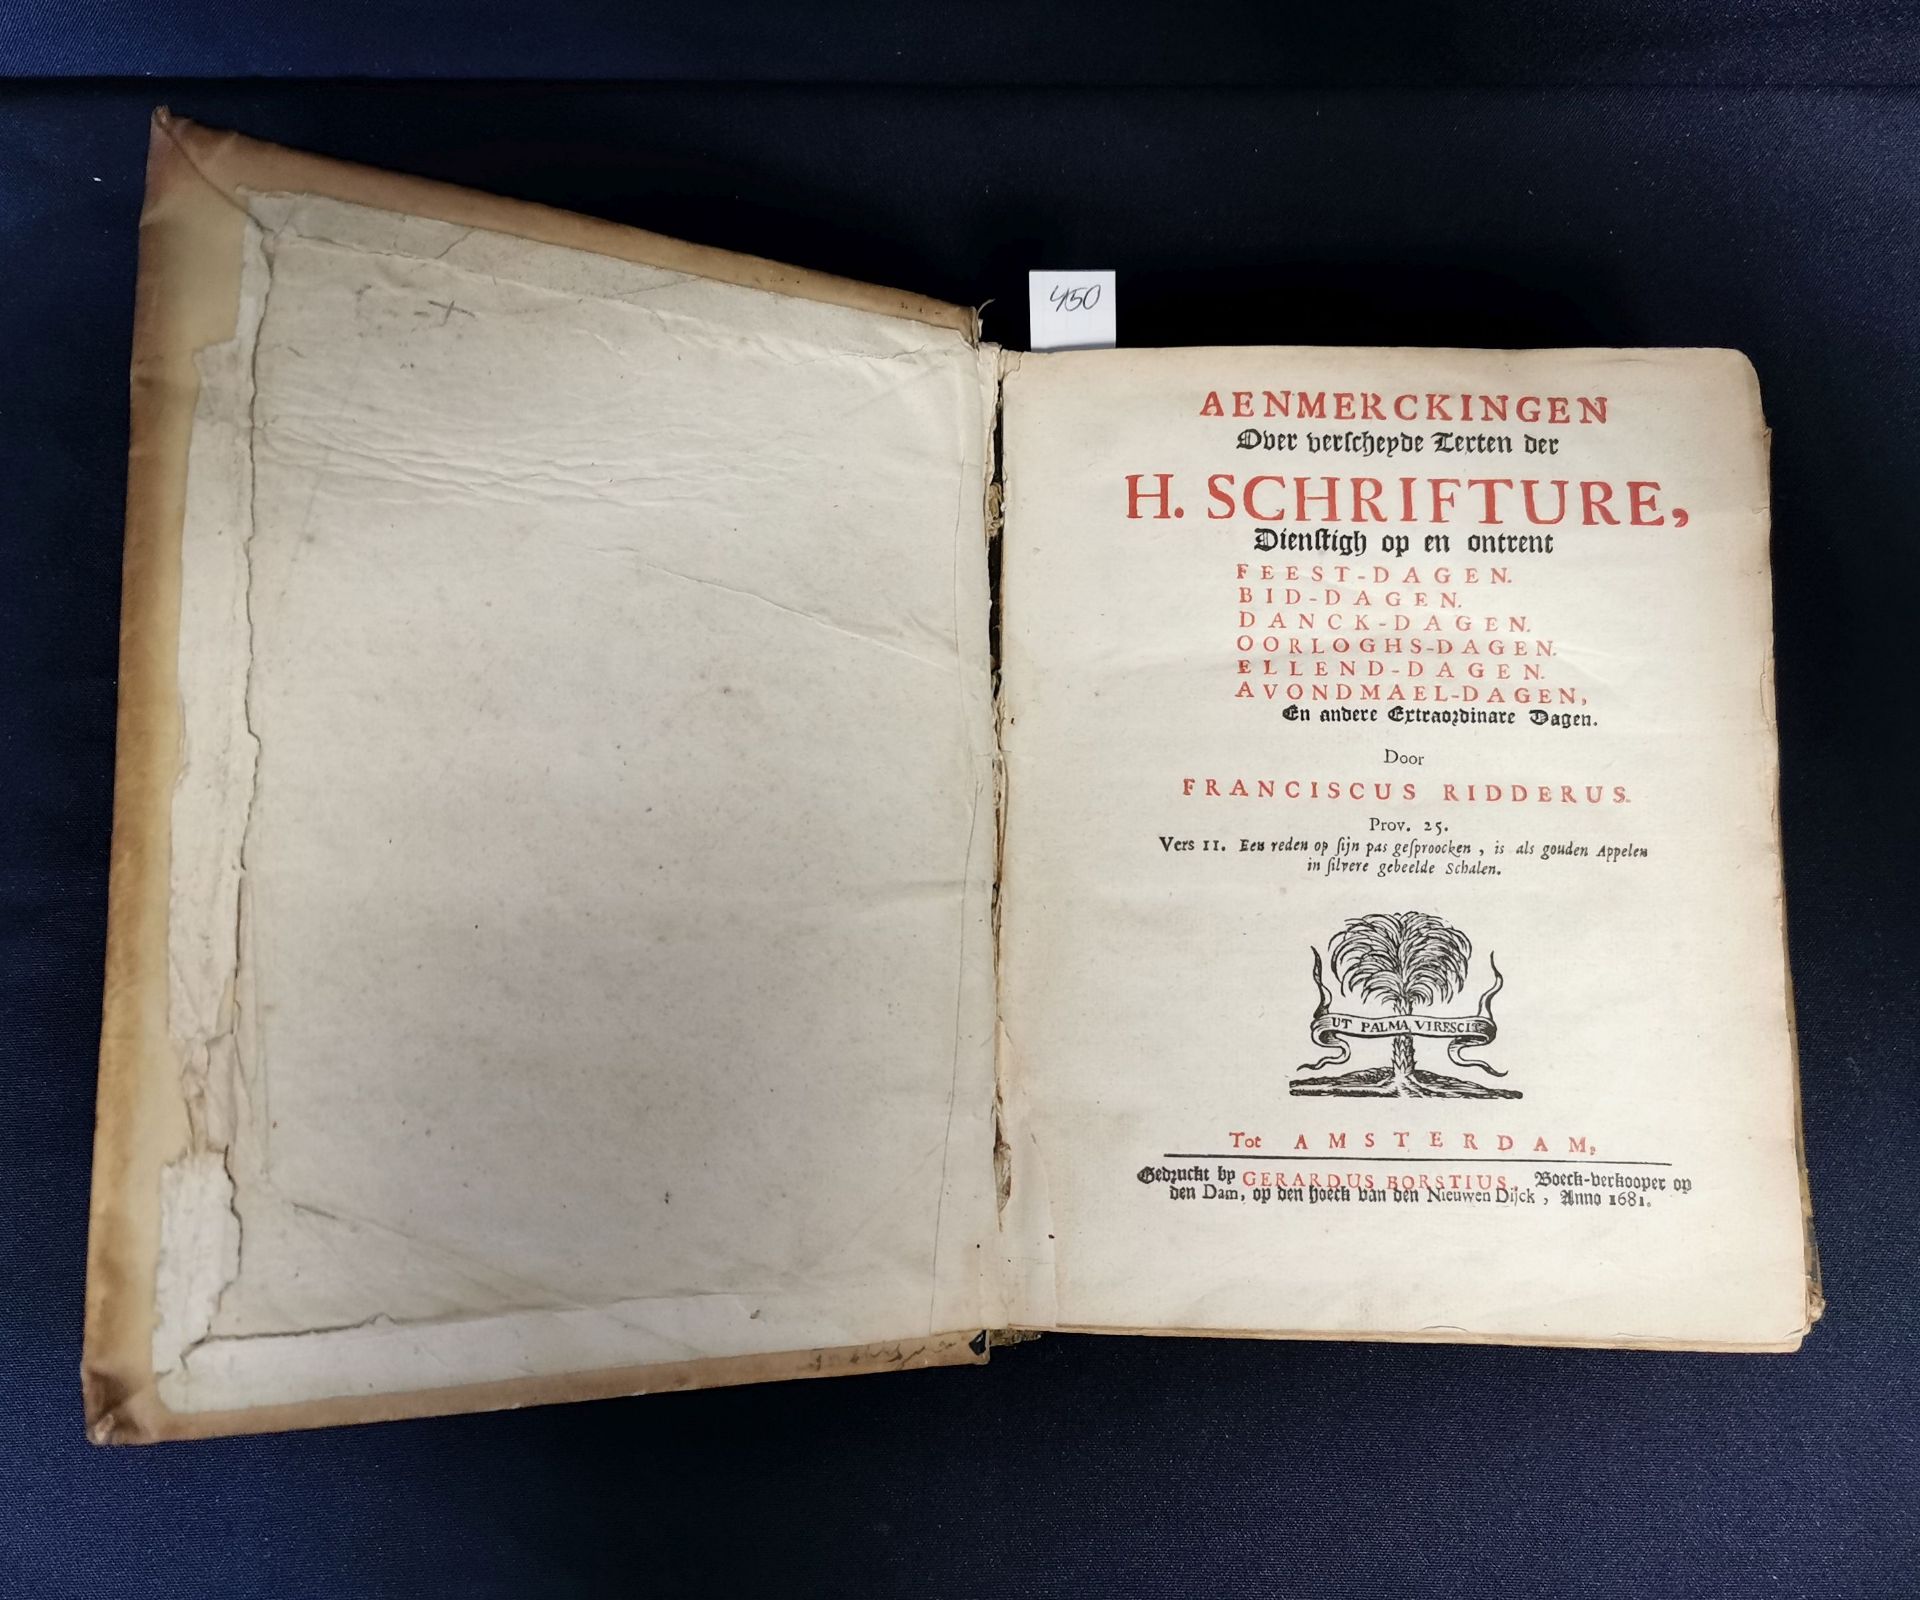 BOOK FROM 1681